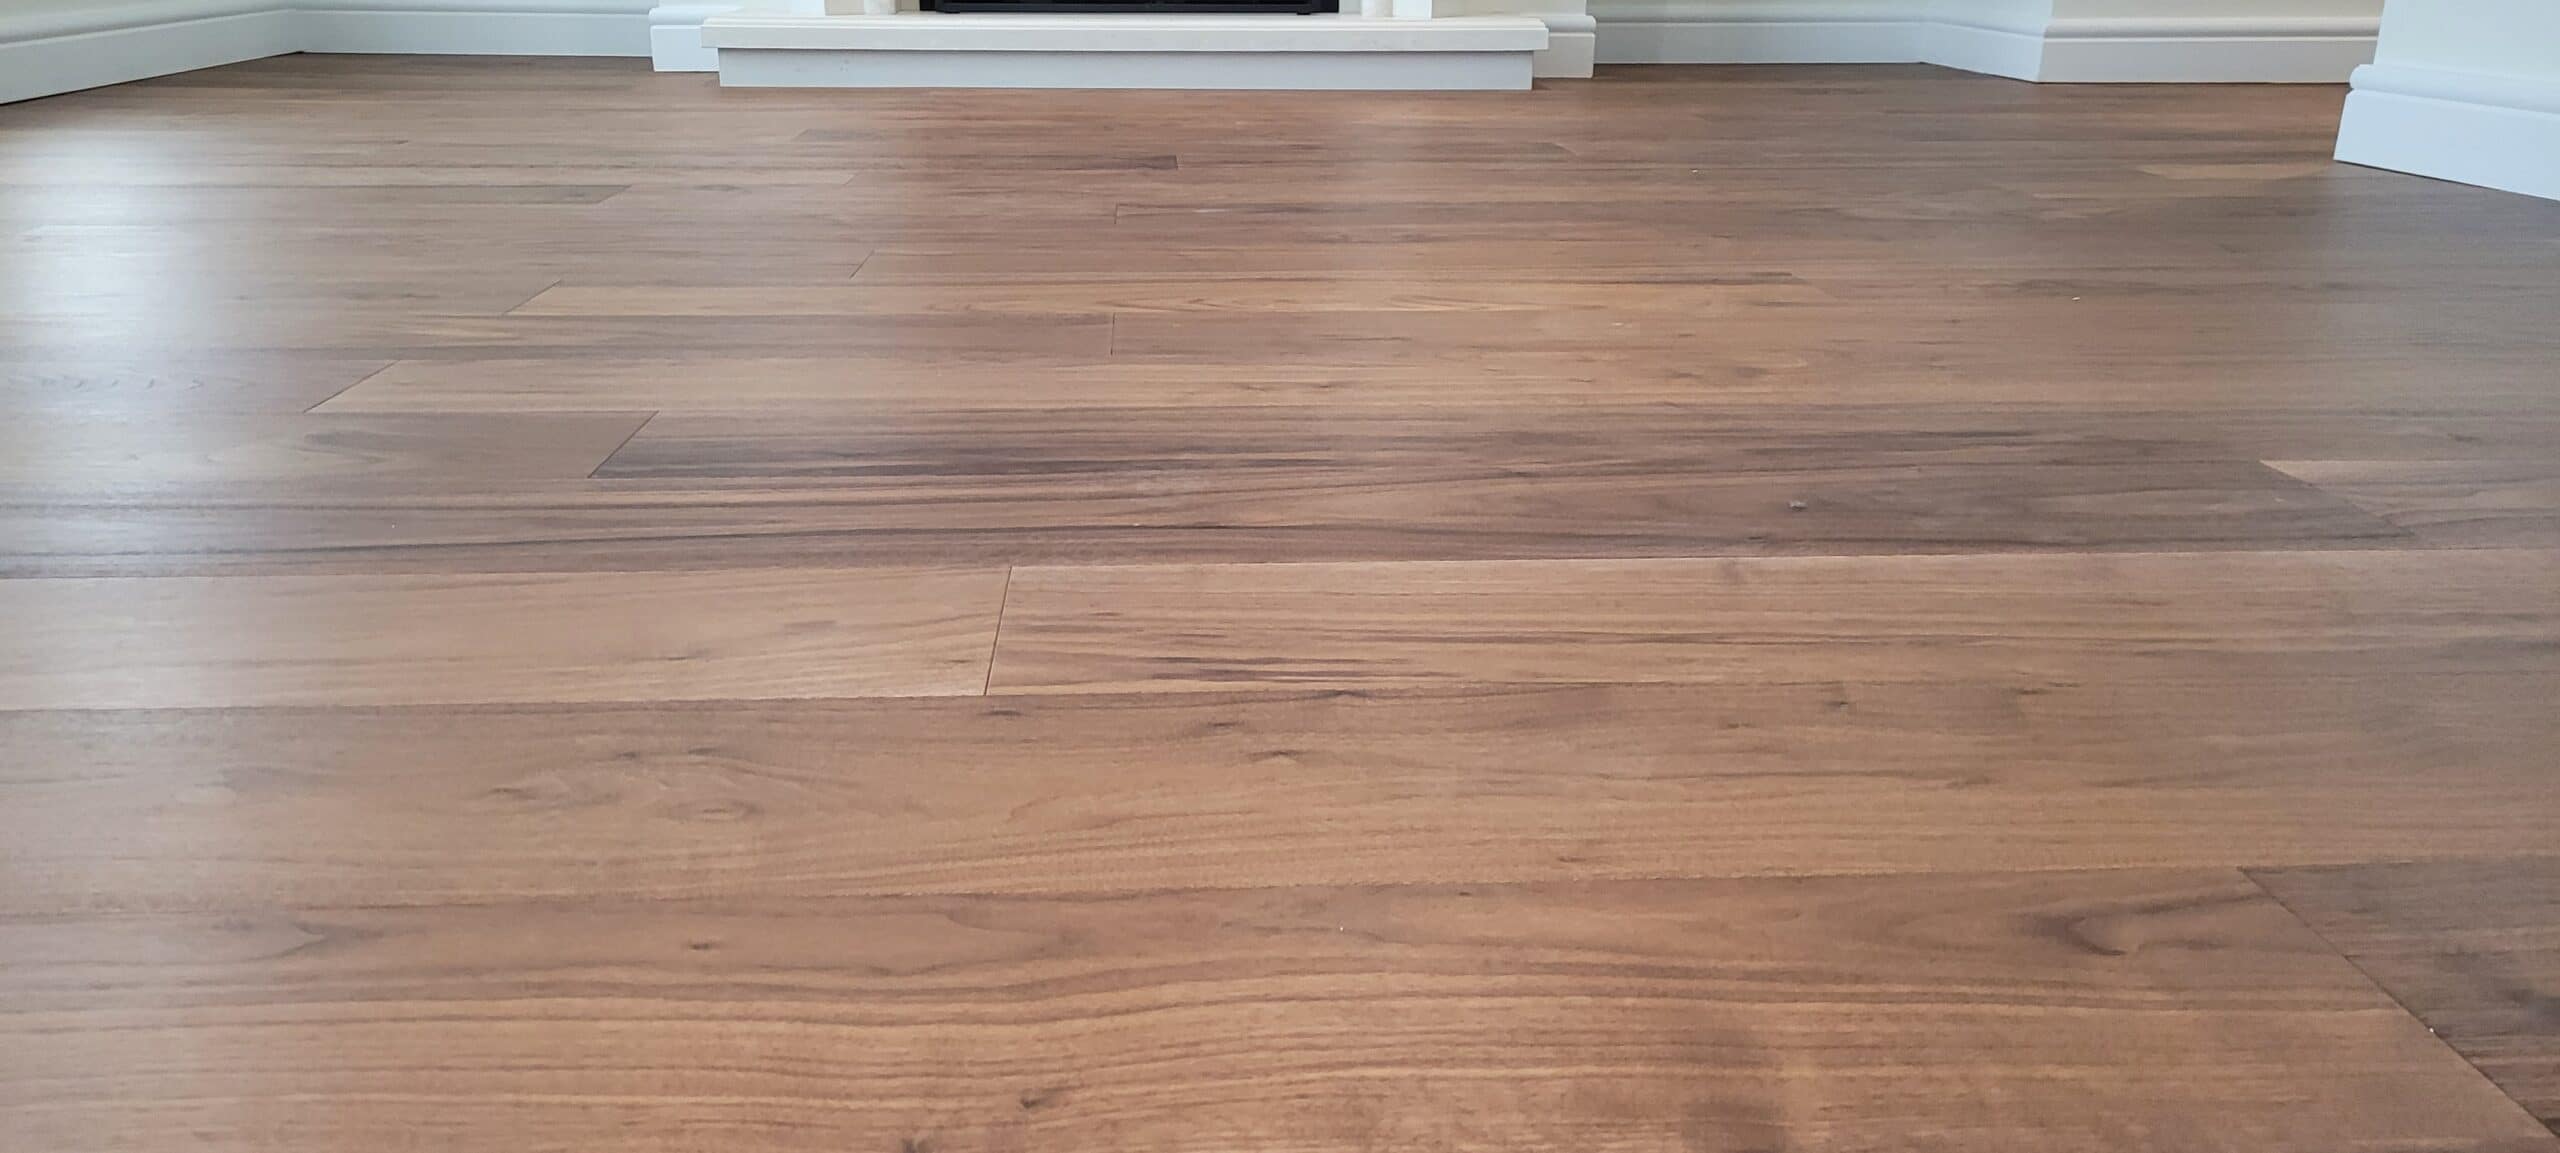 Traditional hardwood flooring charm in Vancouver